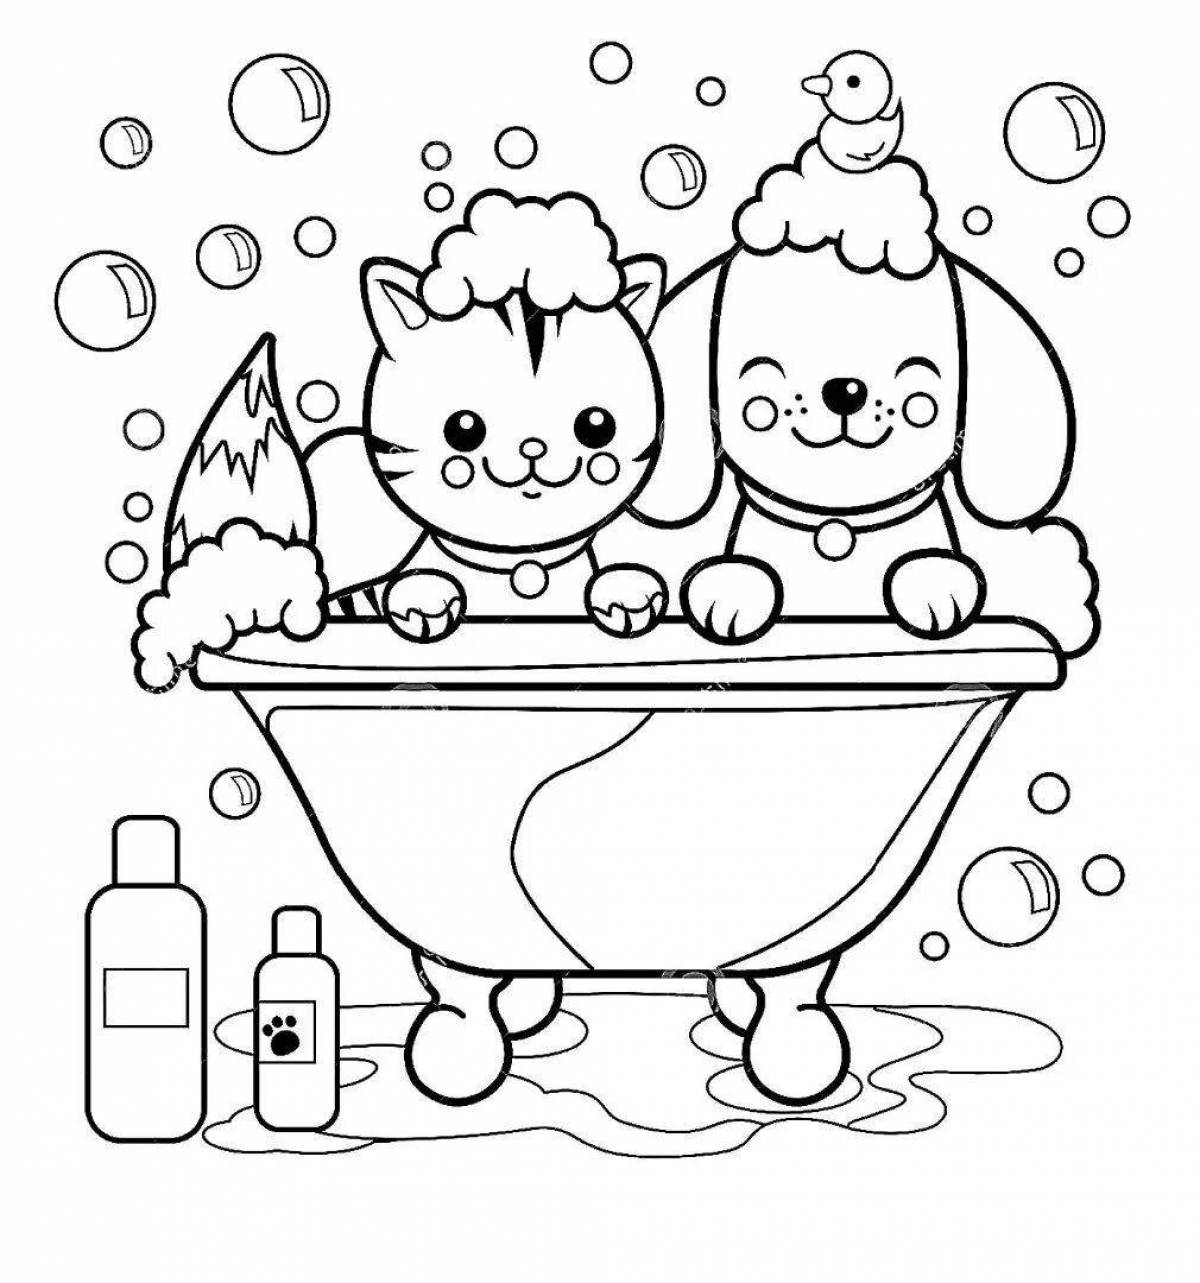 Glowing bathtub coloring page for kids